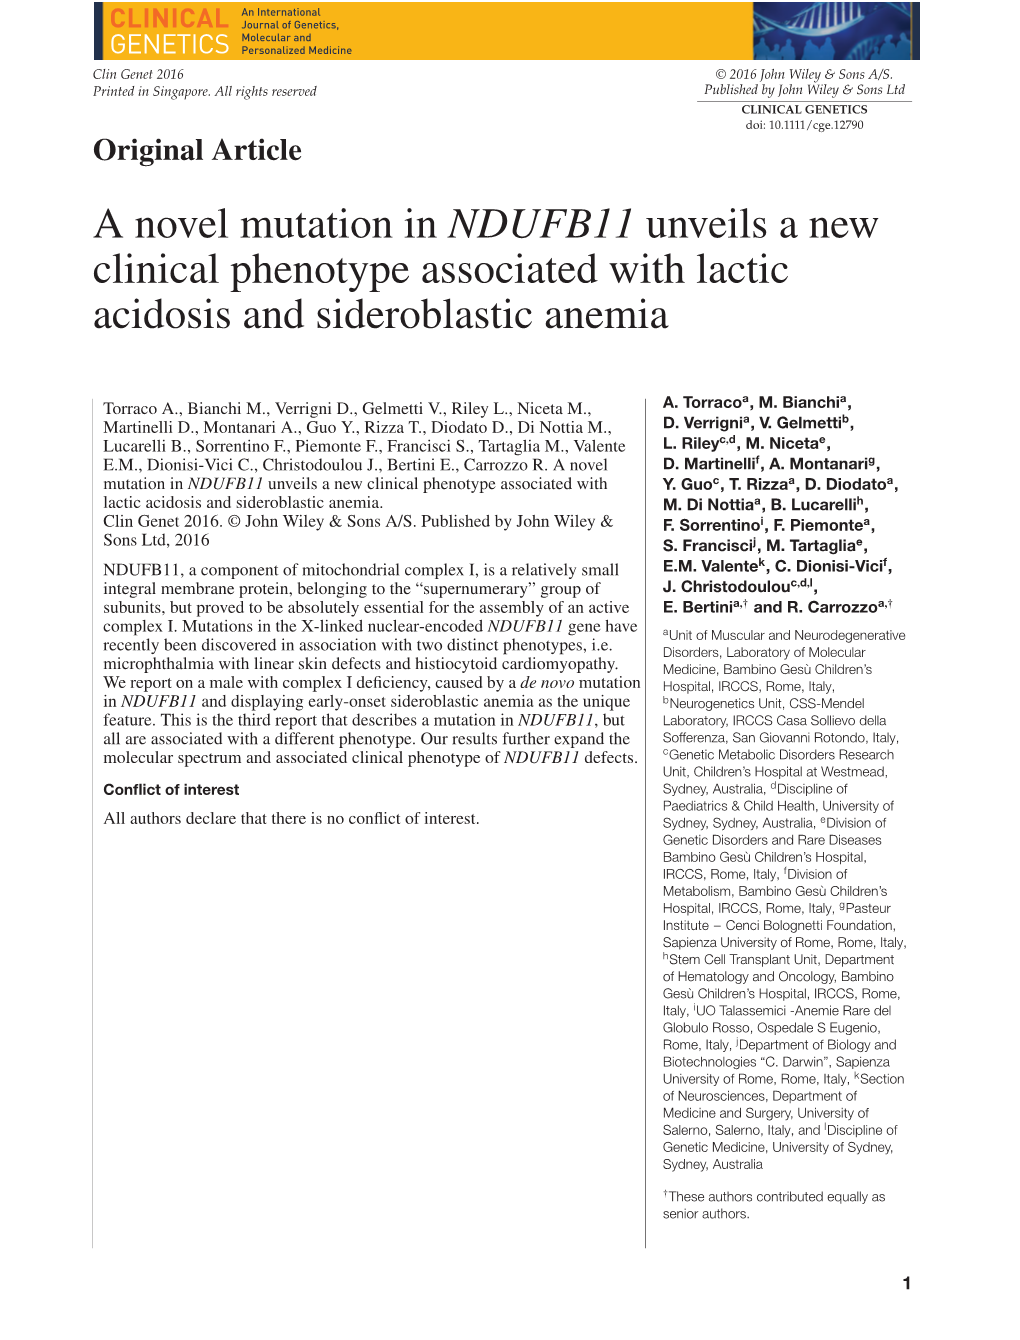 A Novel Mutation in NDUFB11 Unveils a New Clinical Phenotype Associated with Lactic Acidosis and Sideroblastic Anemia